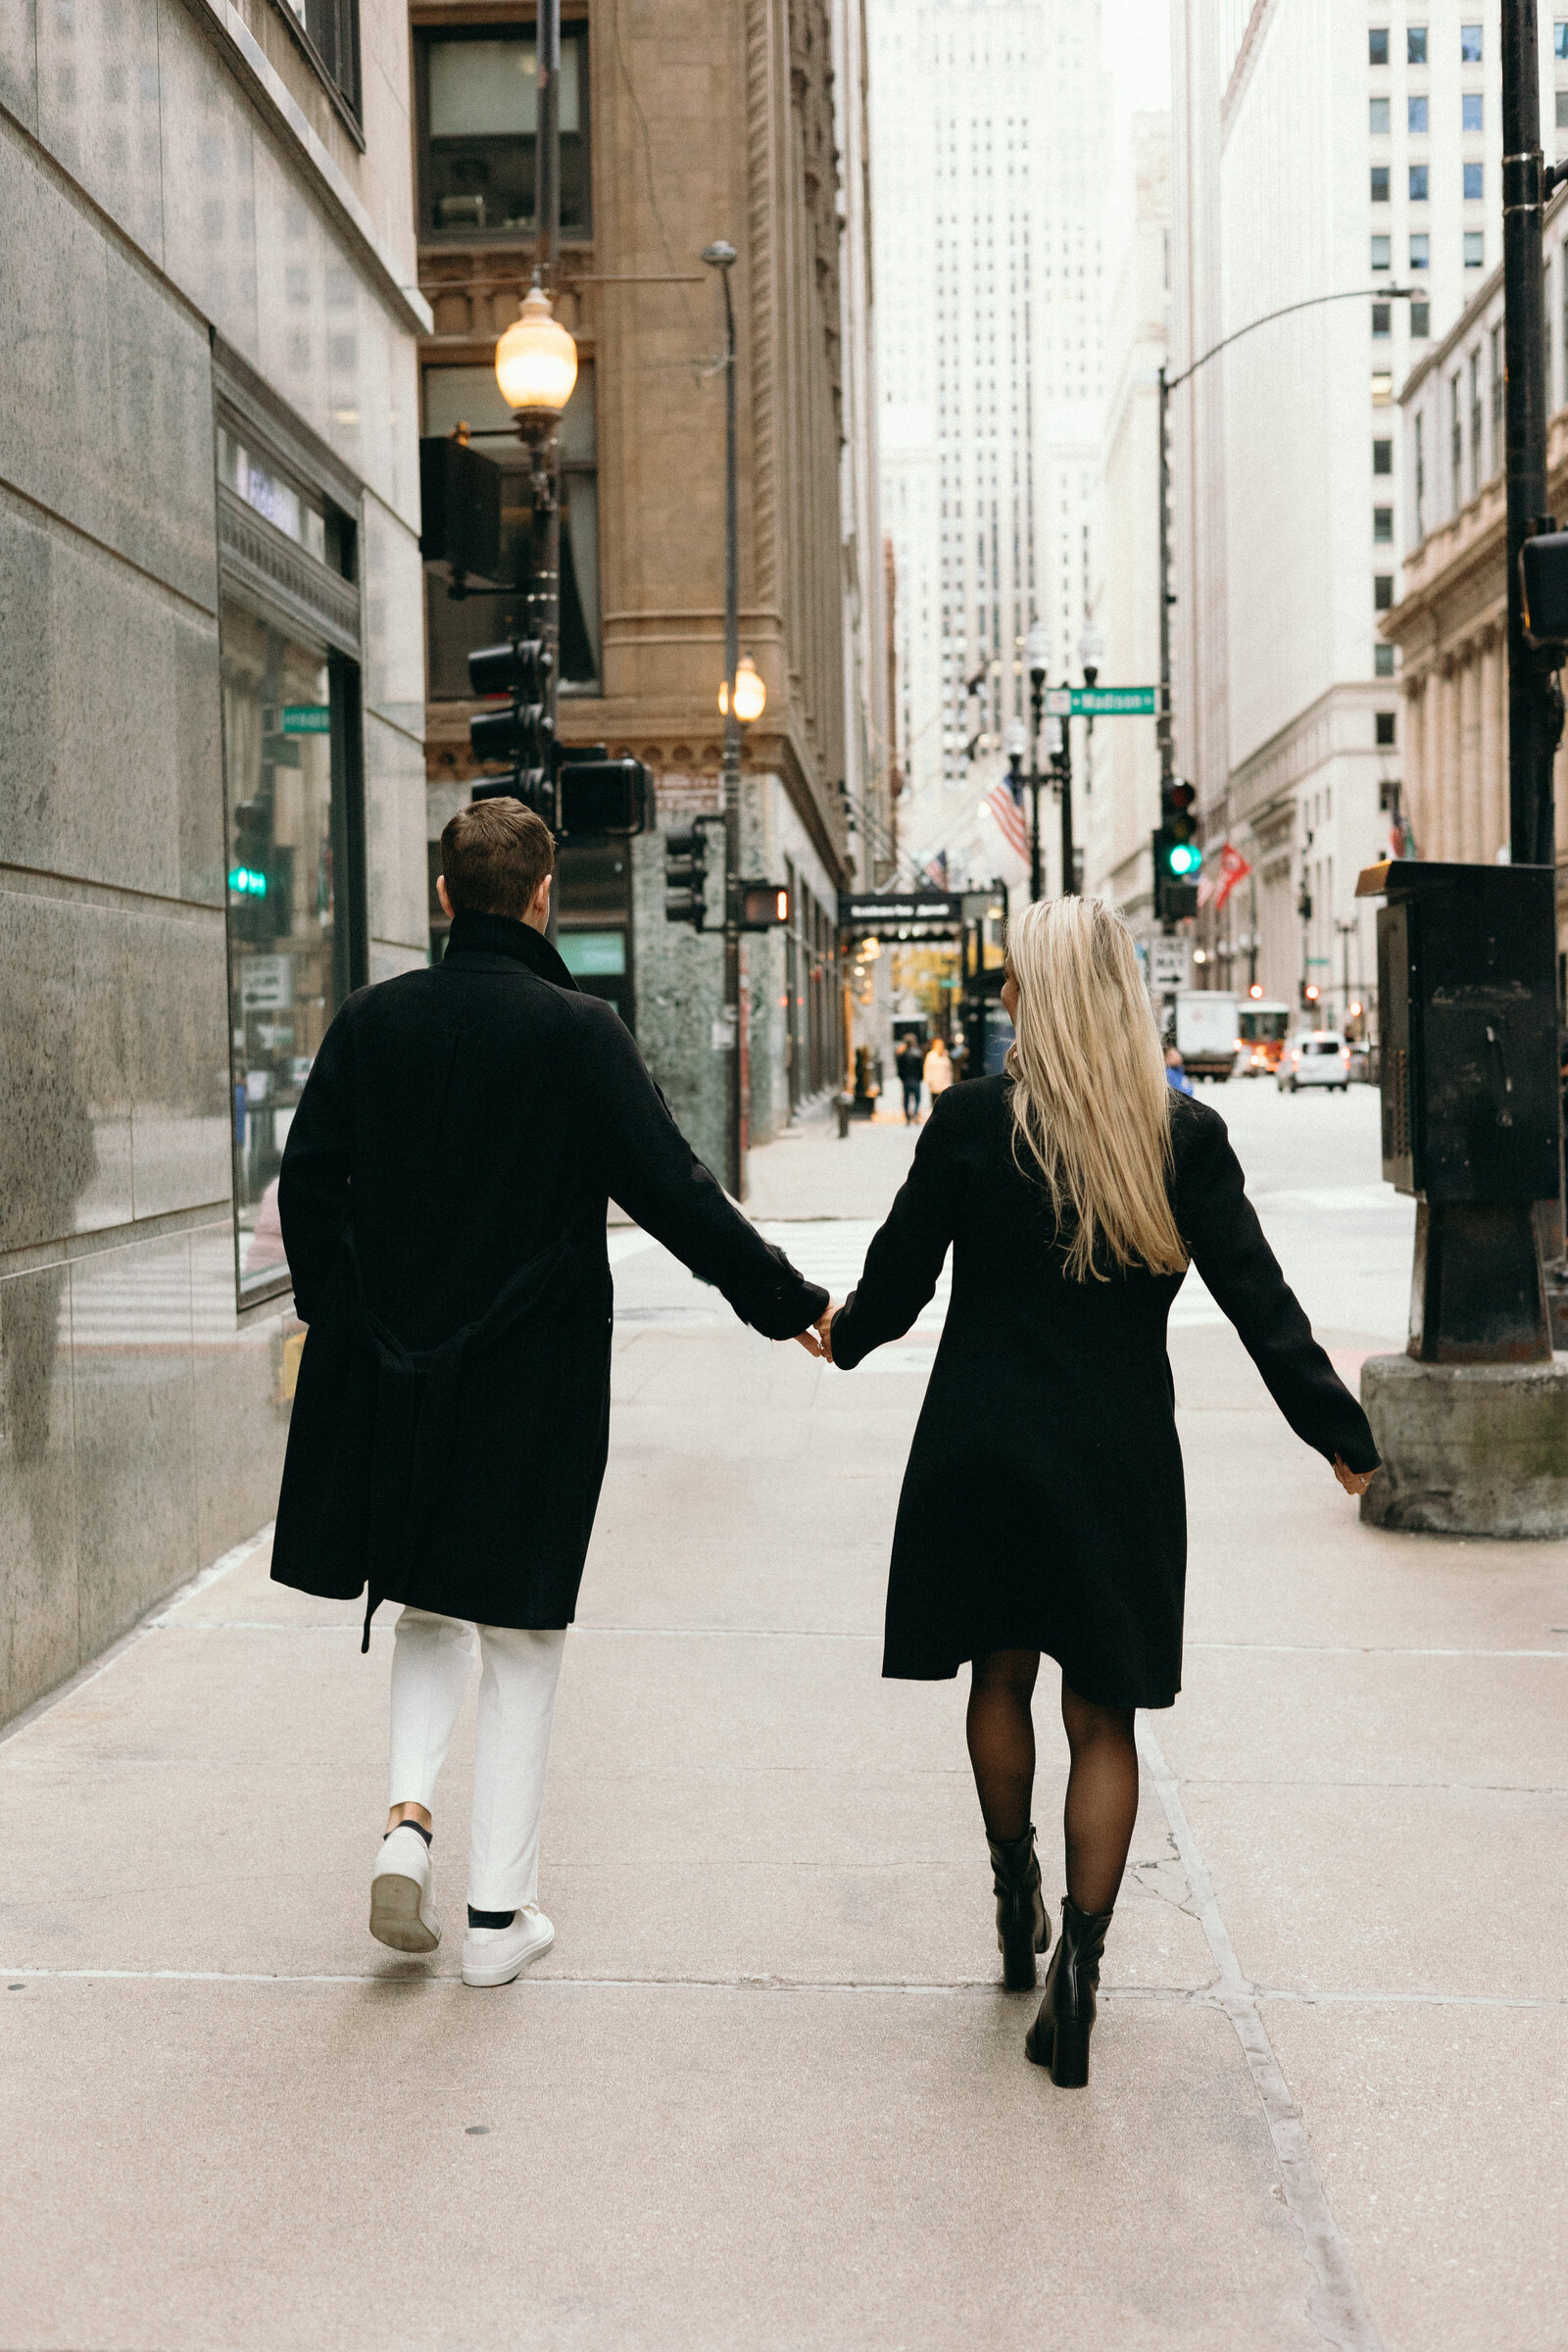 Z Photo and Film - Cody and Silvana's Chicago Engagement Shoot - Chicago, Illinois-54